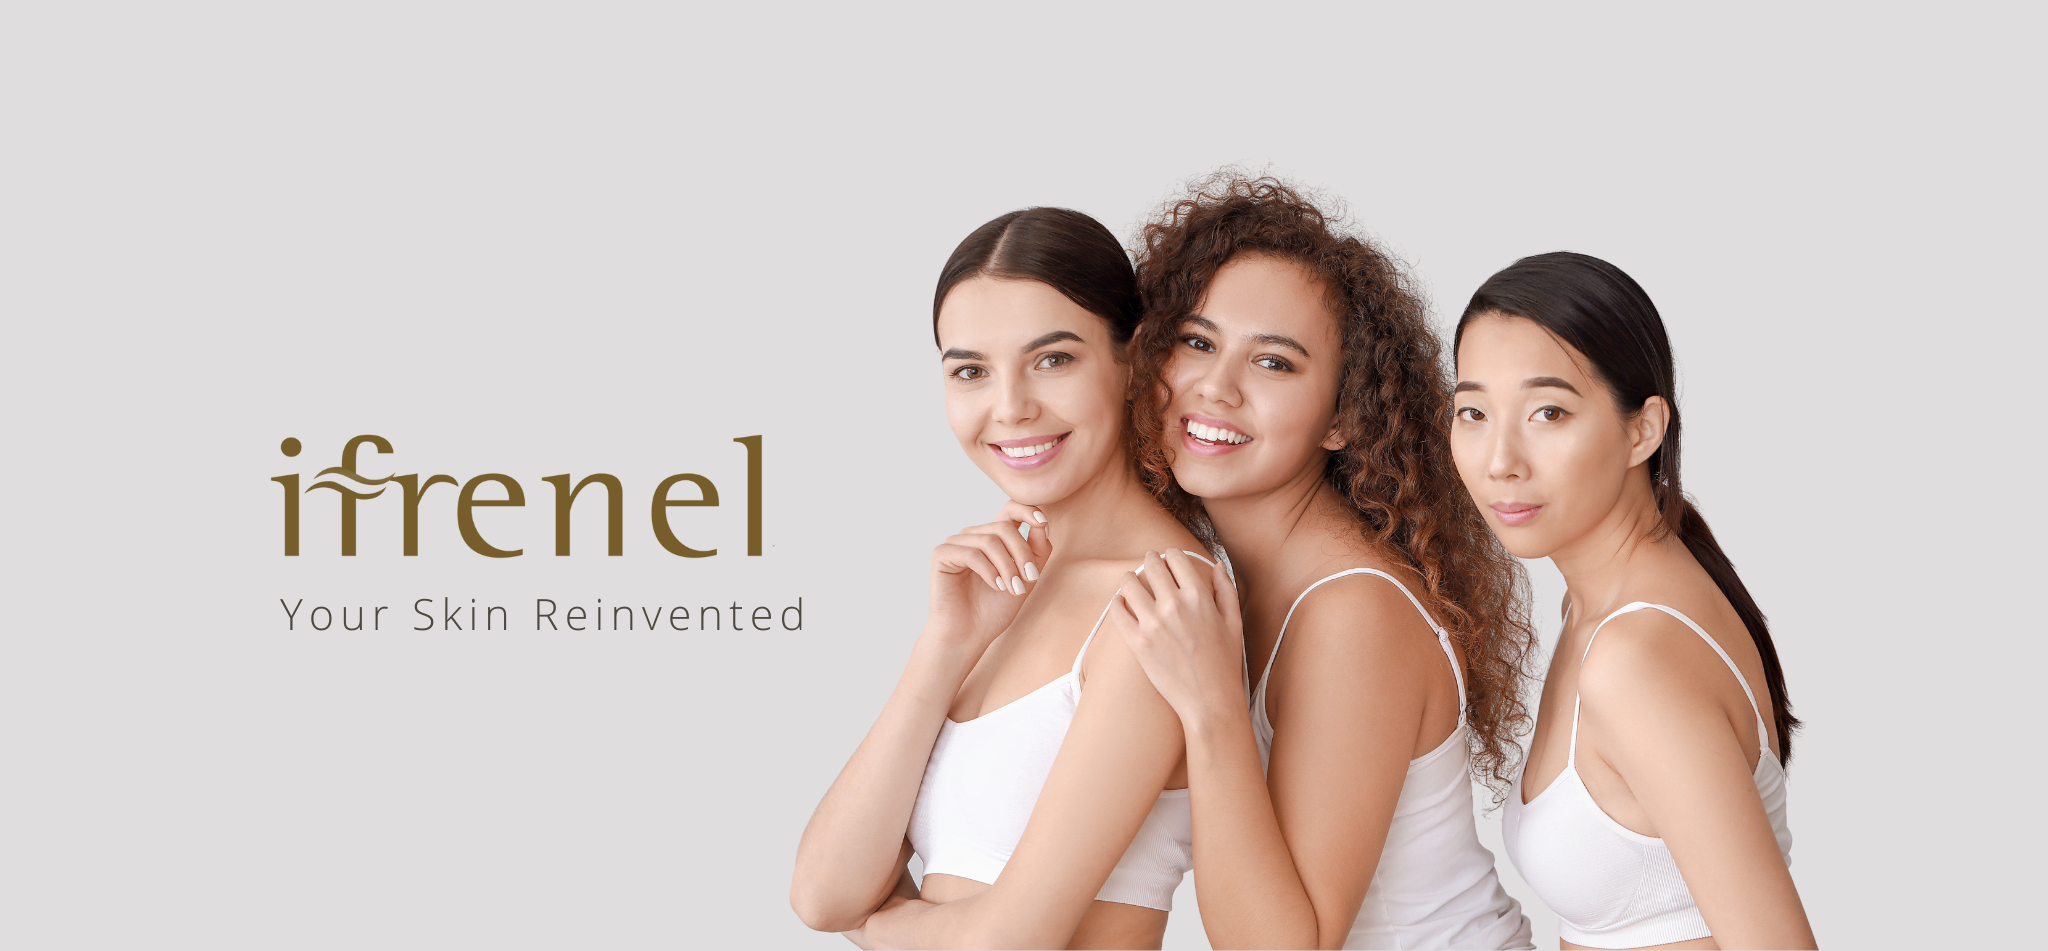 Ifrenel | Your Skin Reinvented